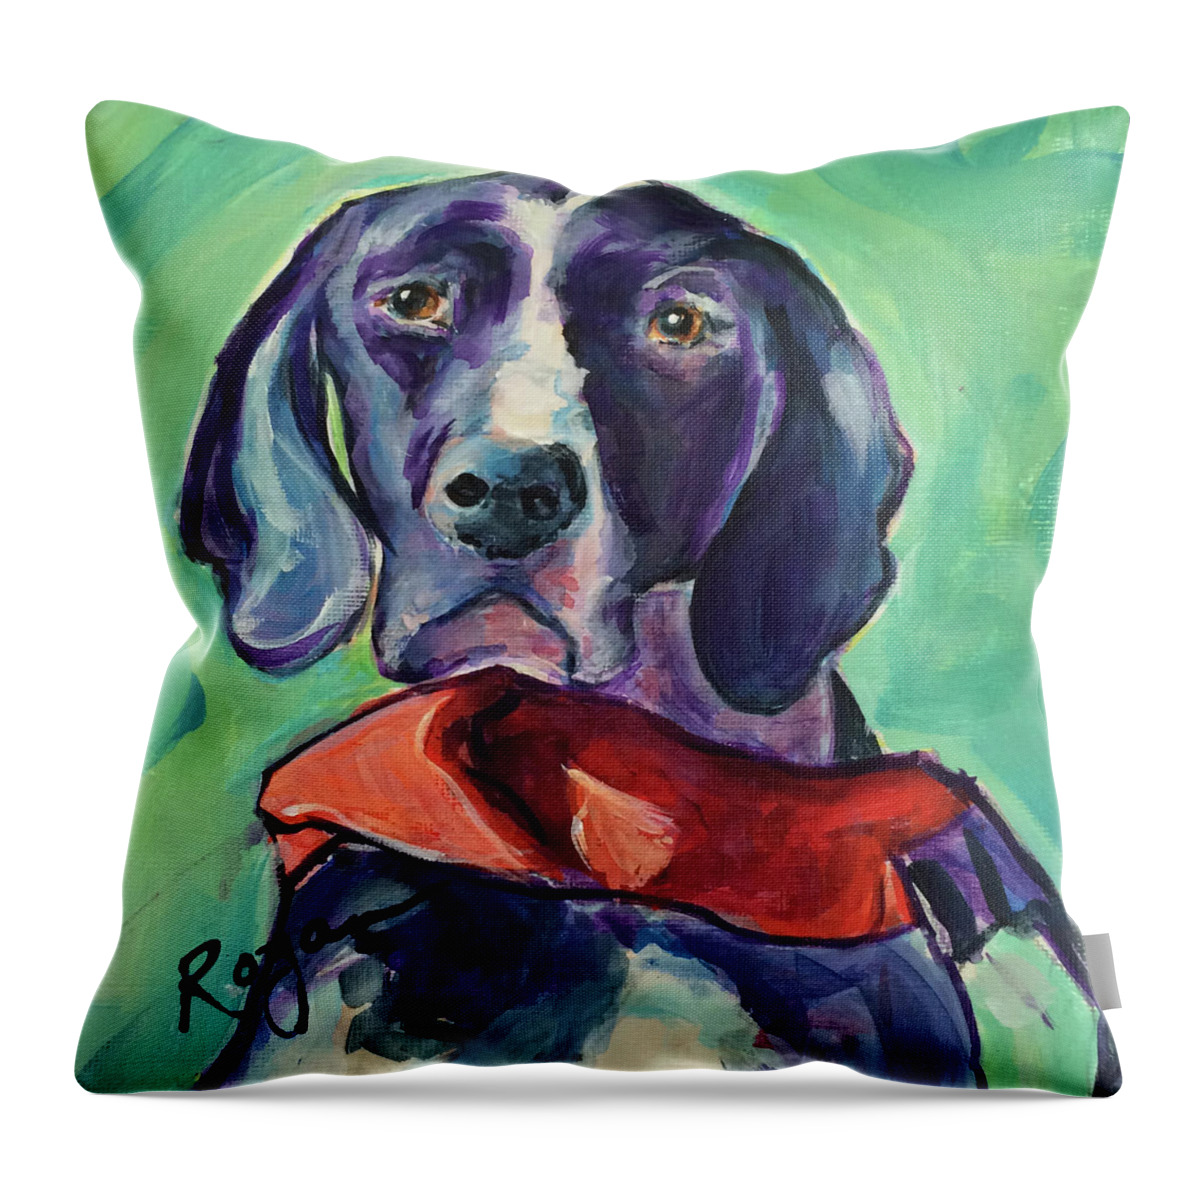  Throw Pillow featuring the painting Shannon by Judy Rogan